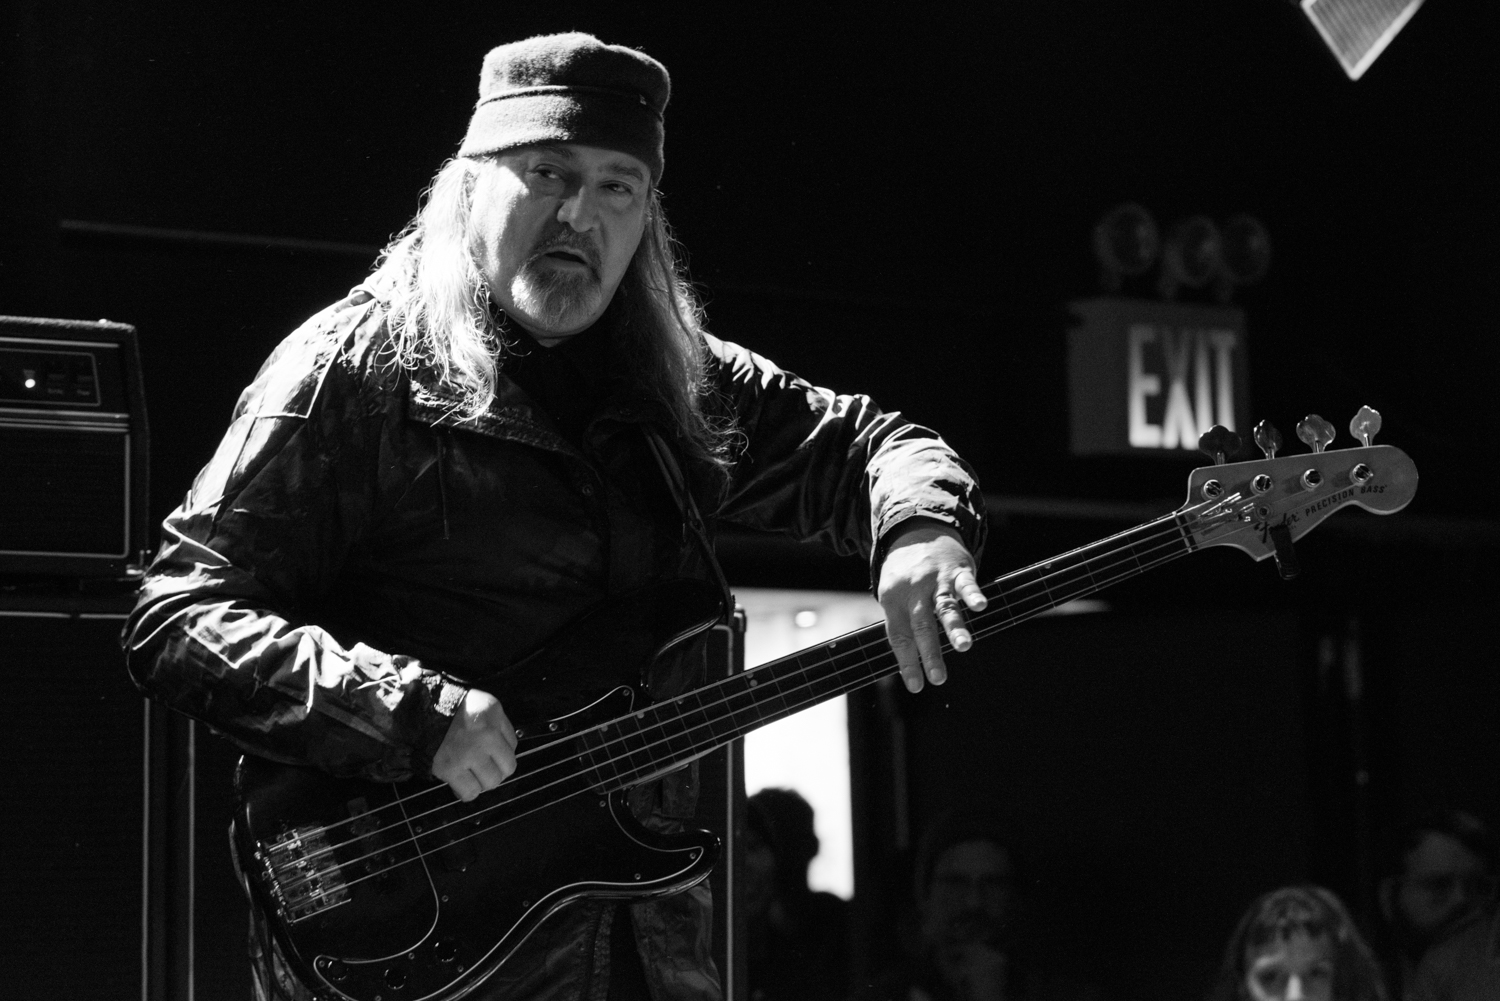 Bill Laswell on electric bass, performing at (Le) Poisson Rouge on Wednesday night, January 13.